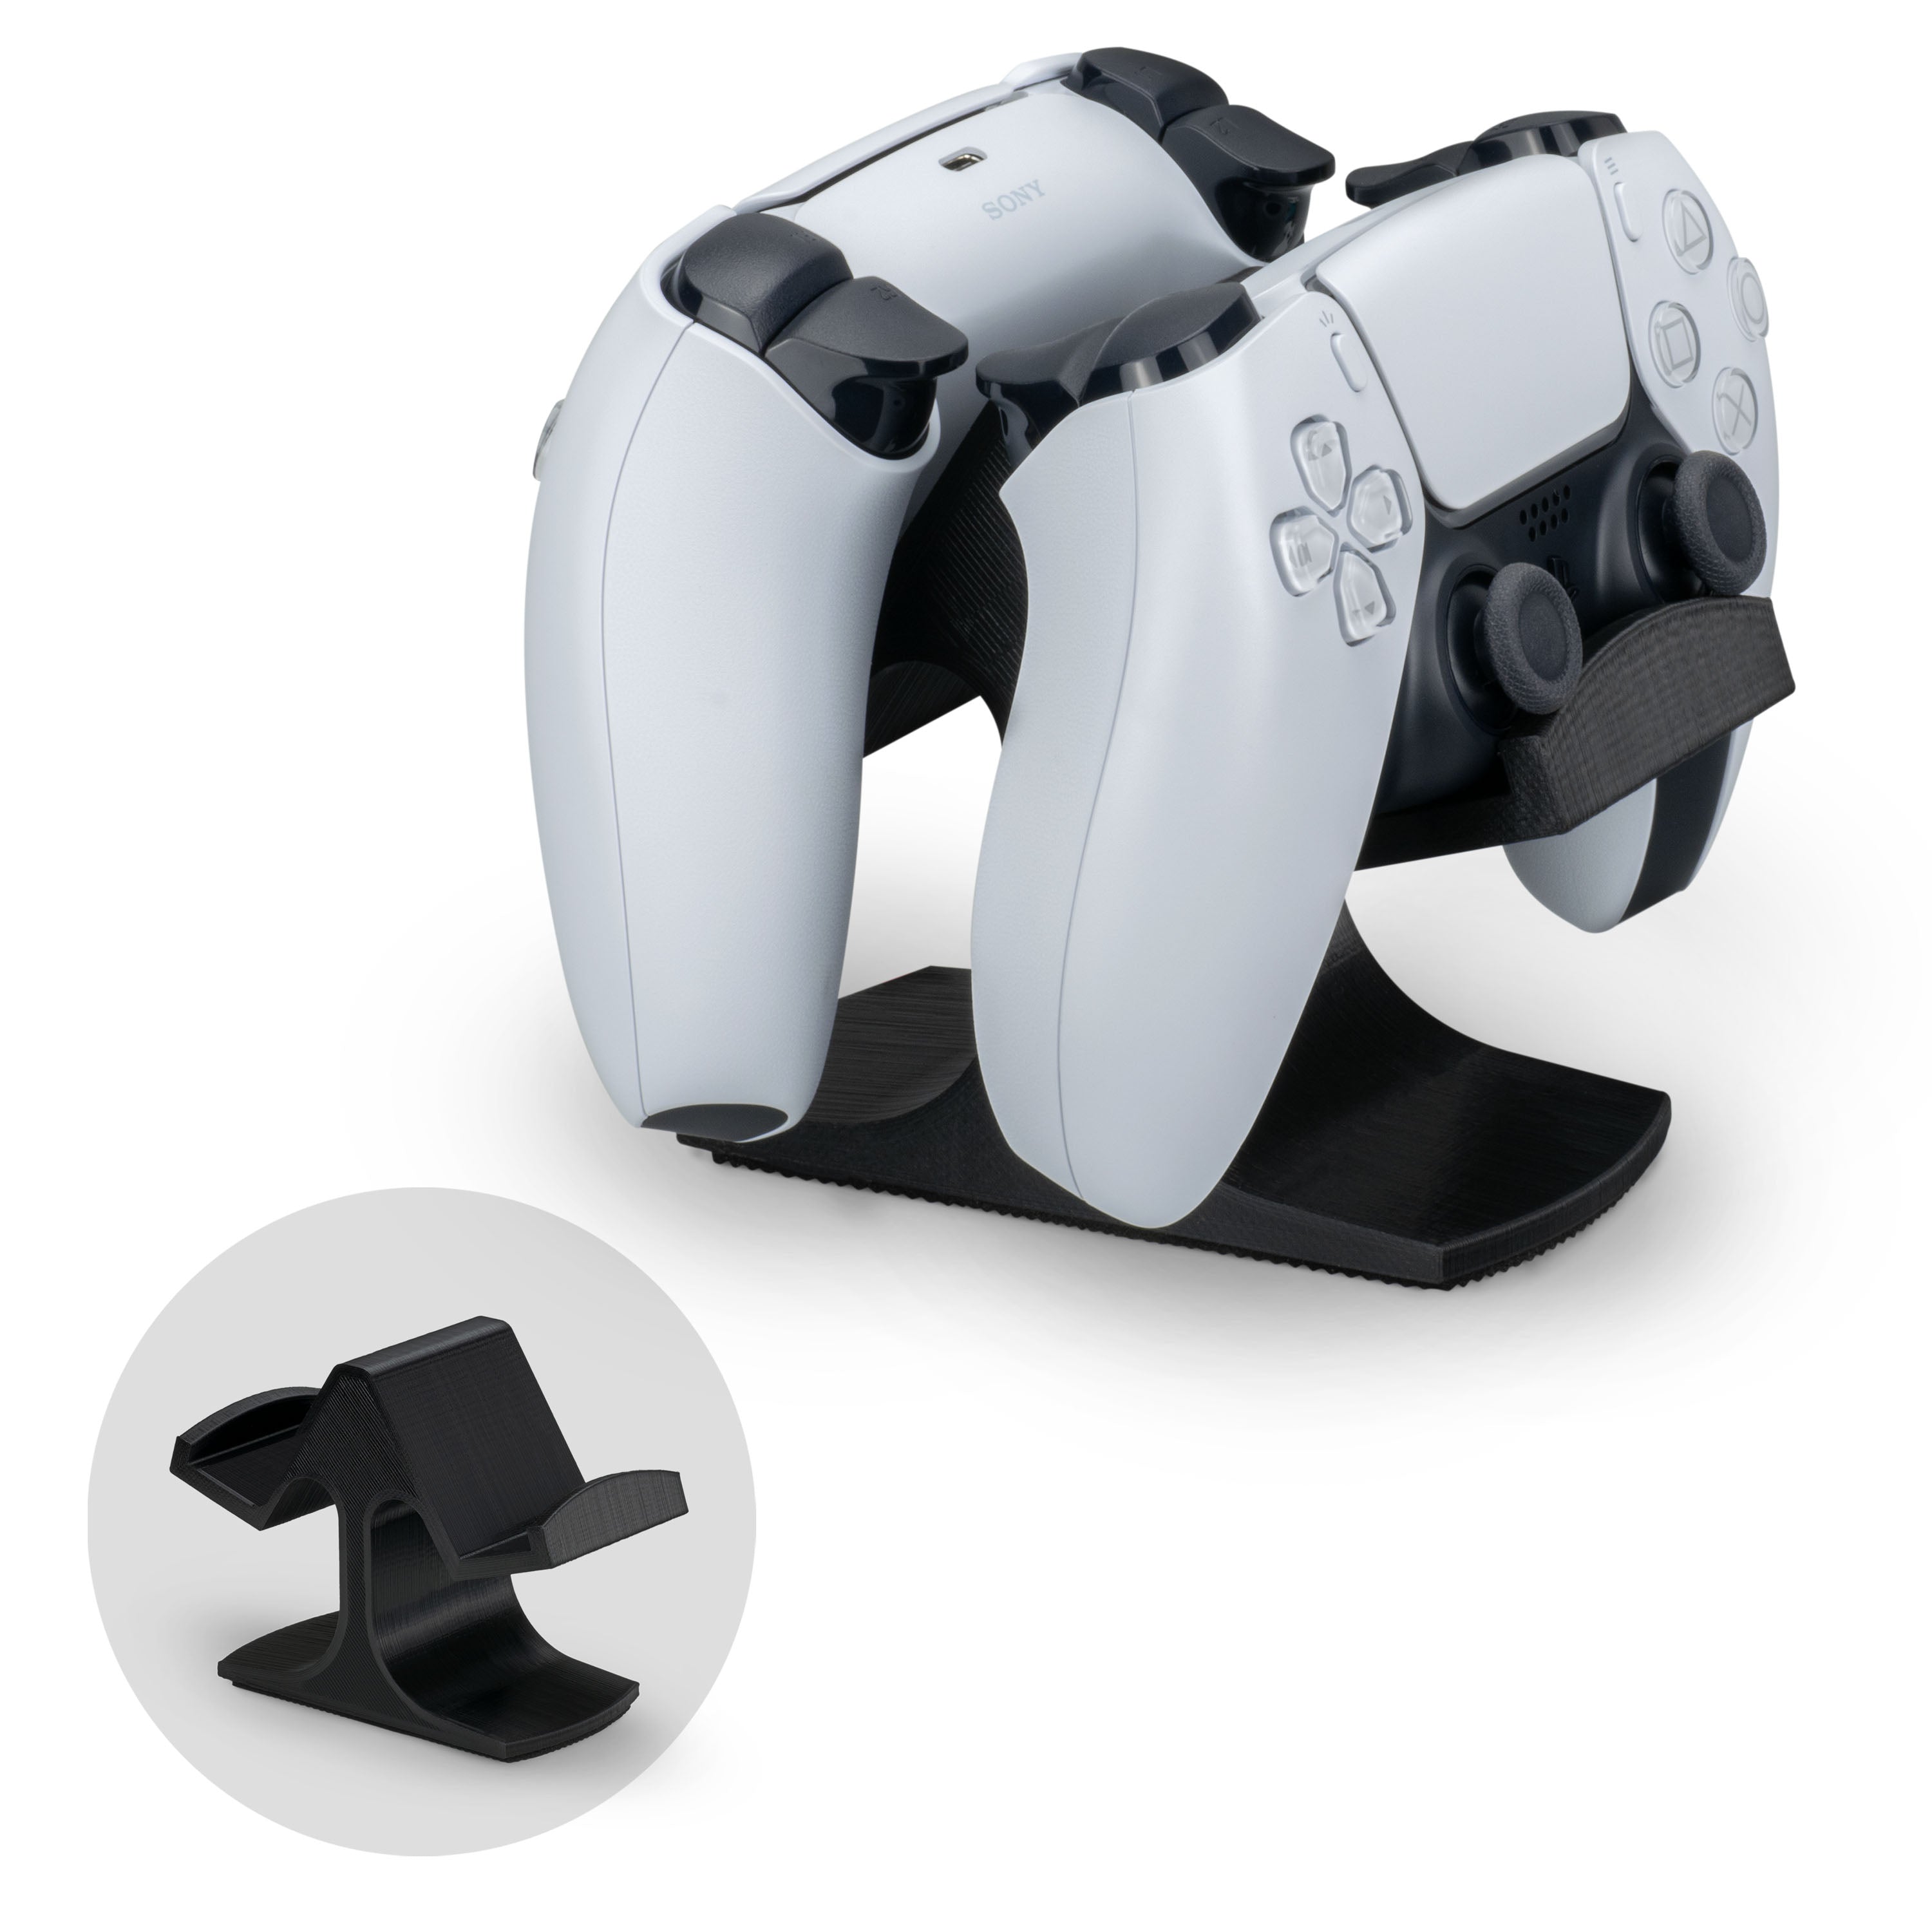 Dual Game Controller Desktop Stand - Design for Xbox ONE, PS5, PS4, Steelseries, Steam & More, Reduce Clutter UGDS-03 - Brainwavz Audio